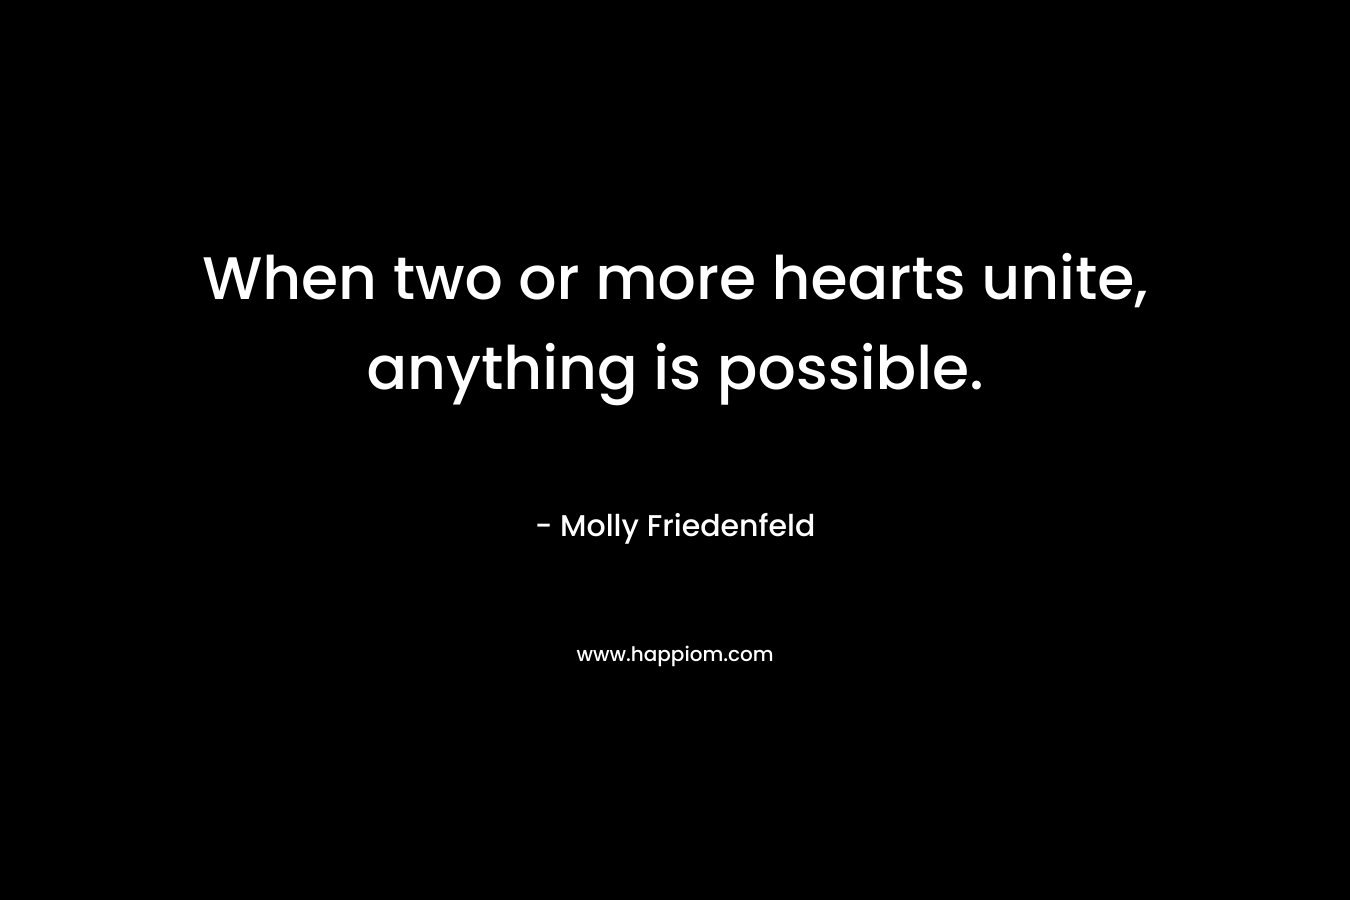 When two or more hearts unite, anything is possible.